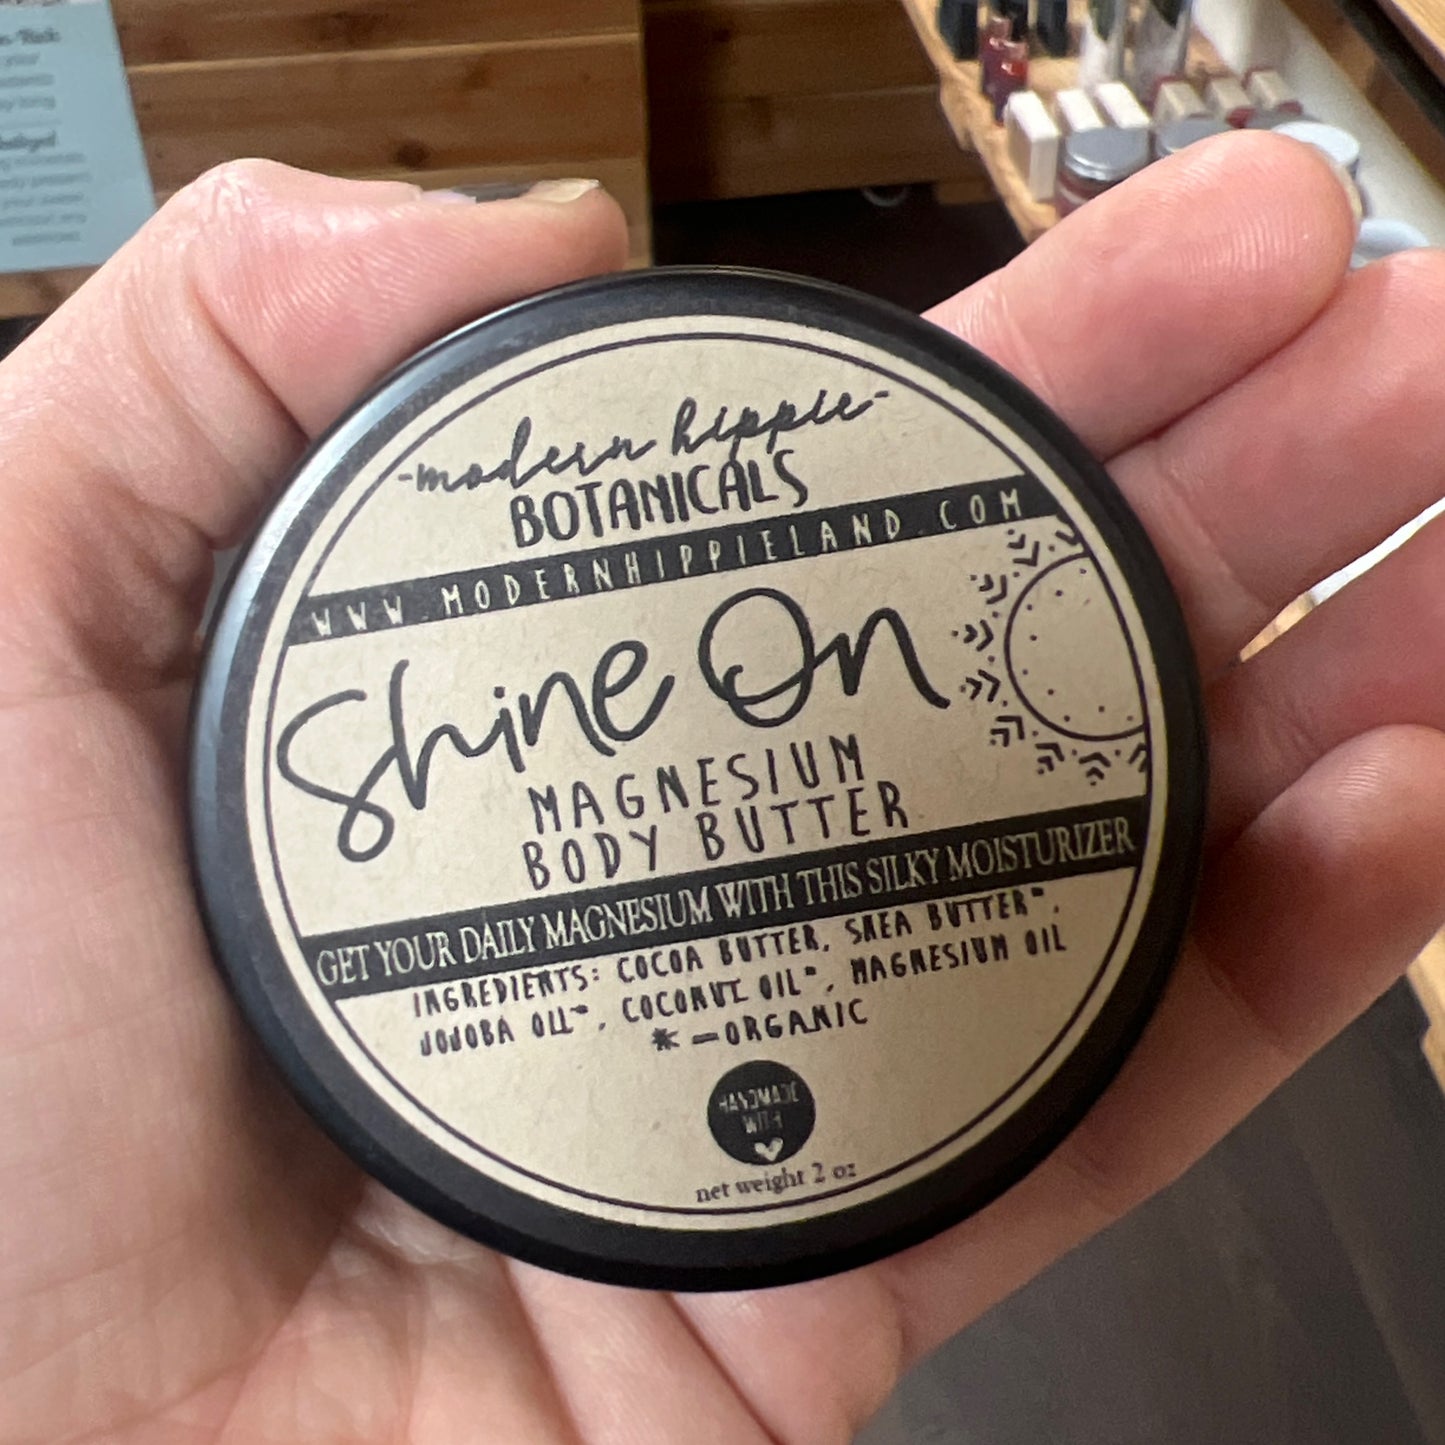 Shine On Magnesium Body Butter